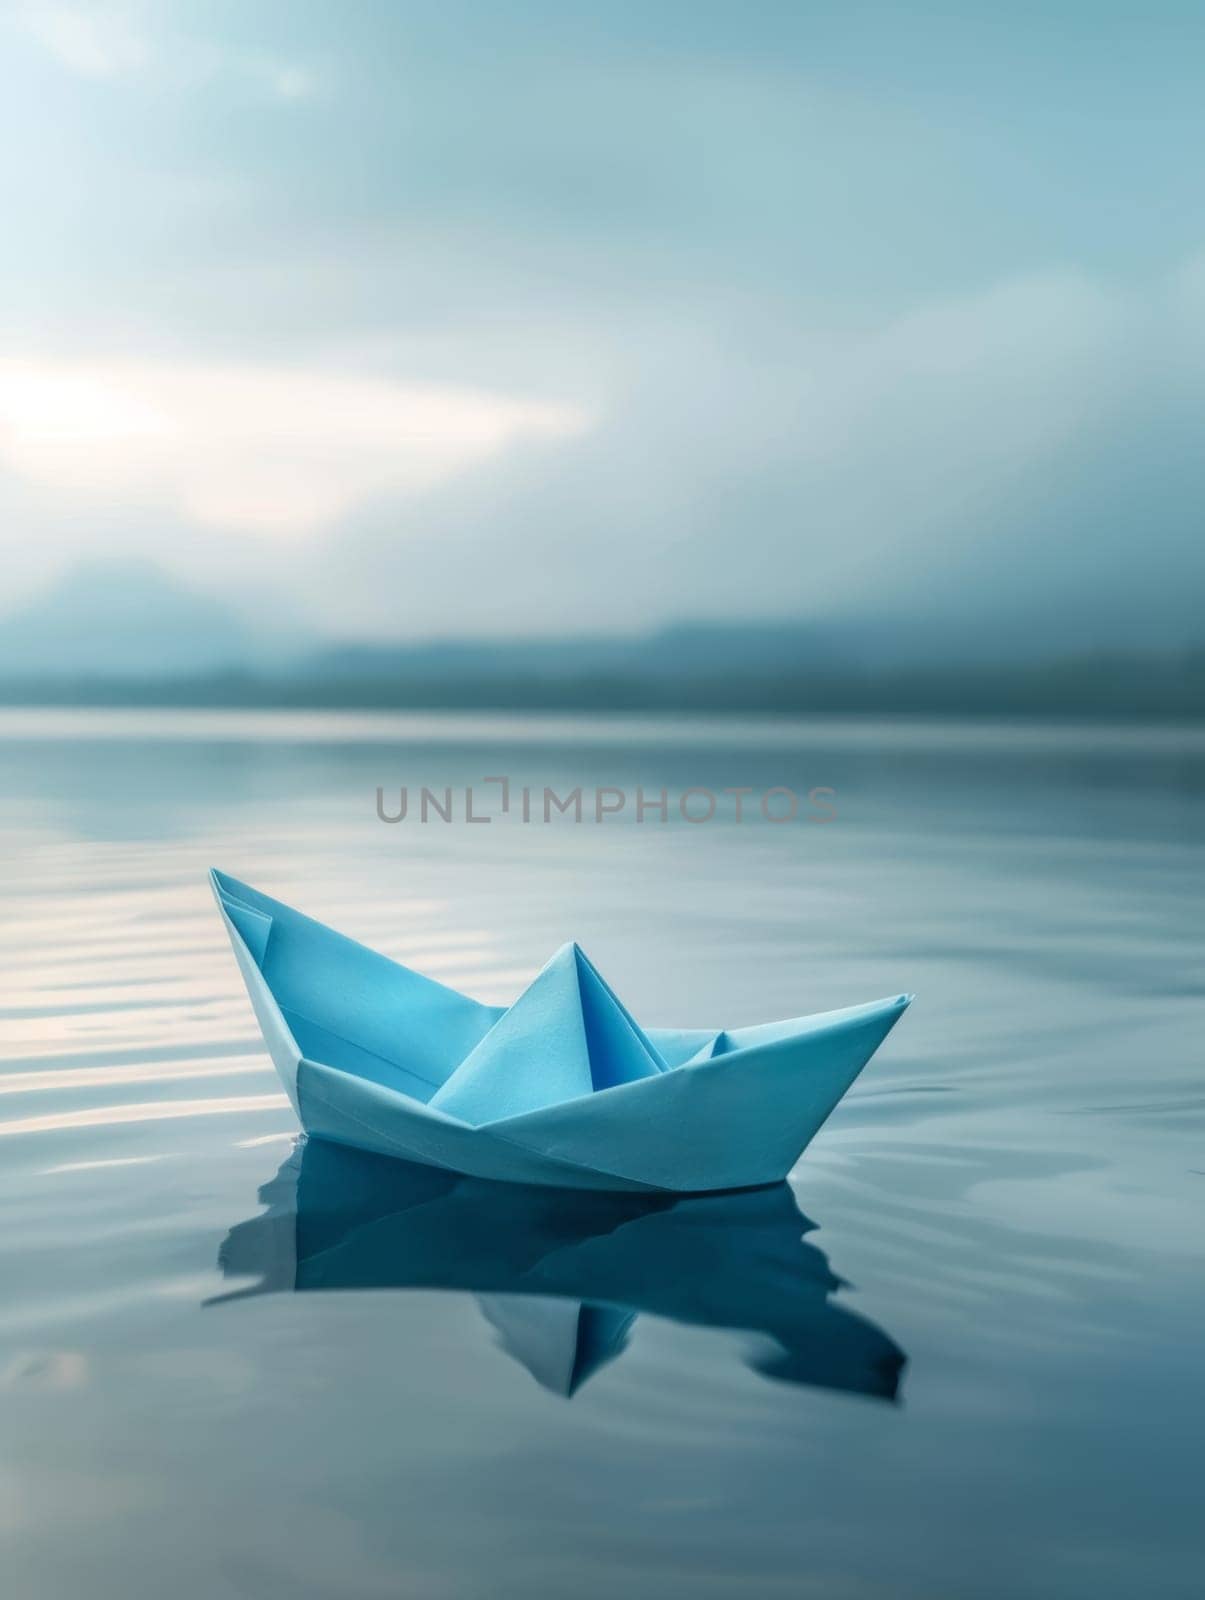 A blue origami boat rests on a glassy lake, its reflection a perfect symmetry in the waters calm